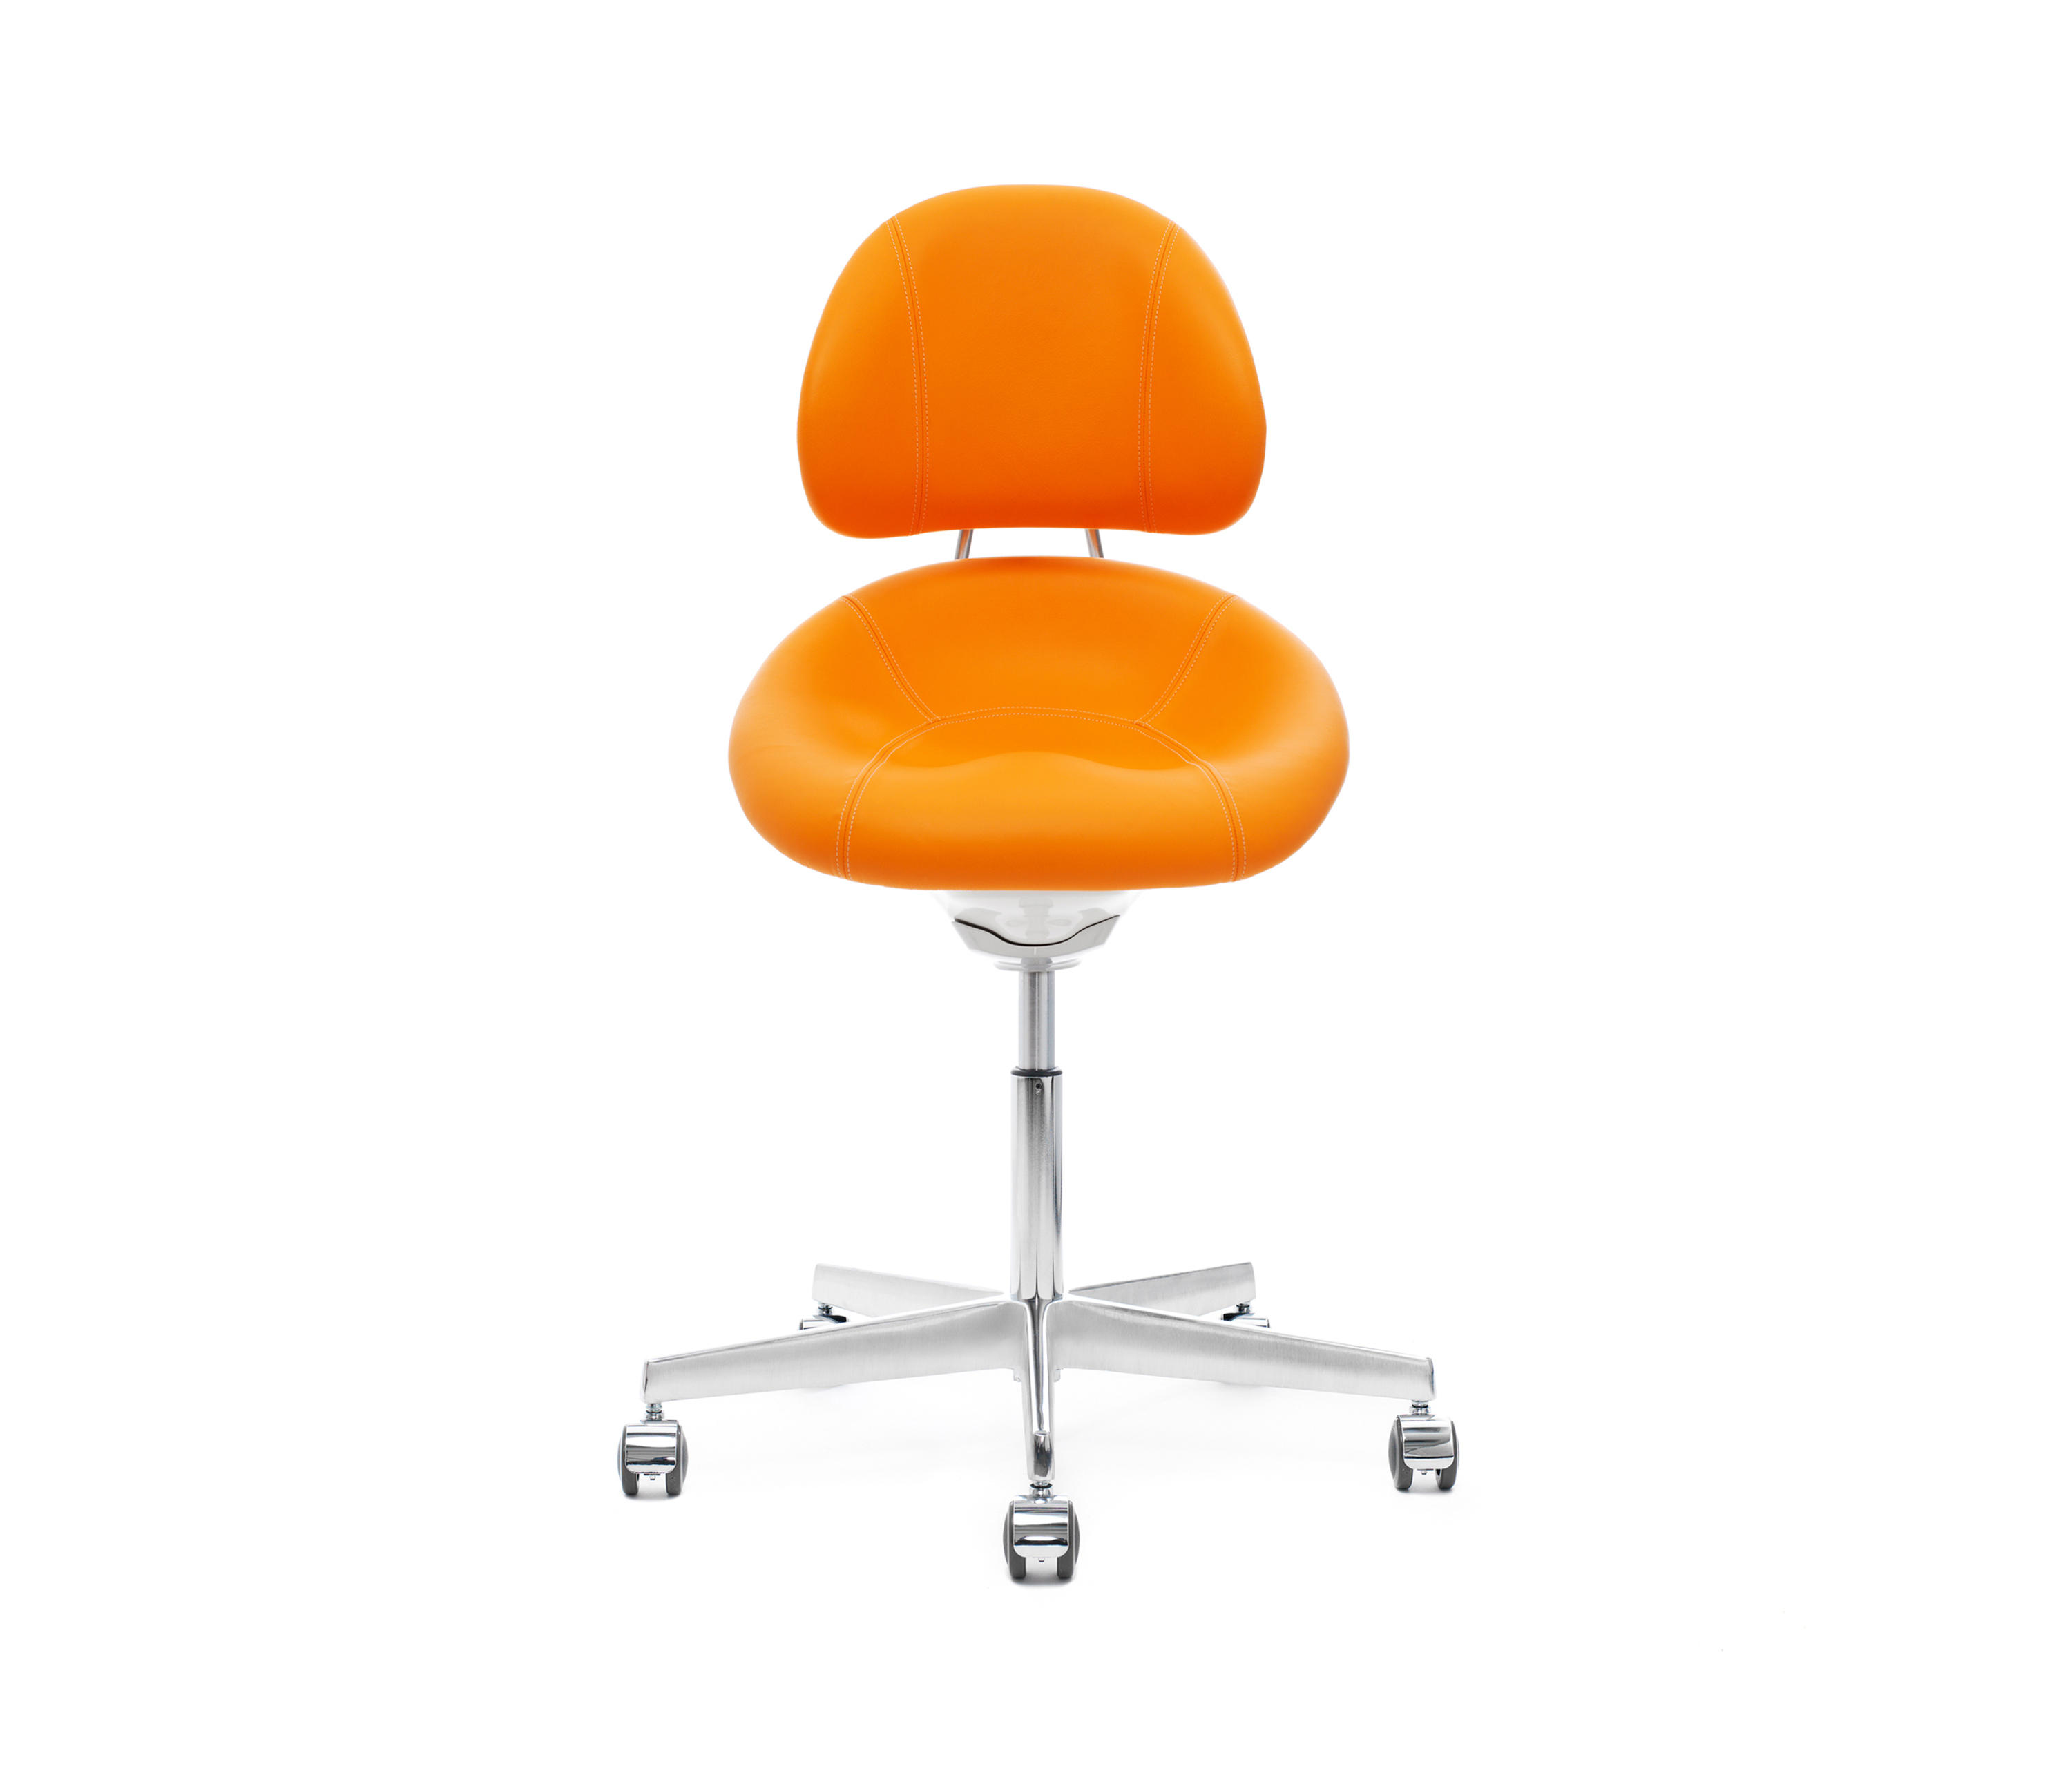 definitive forudsætning Awakening SAGA OFFICE - Office chairs from Support Design | Architonic